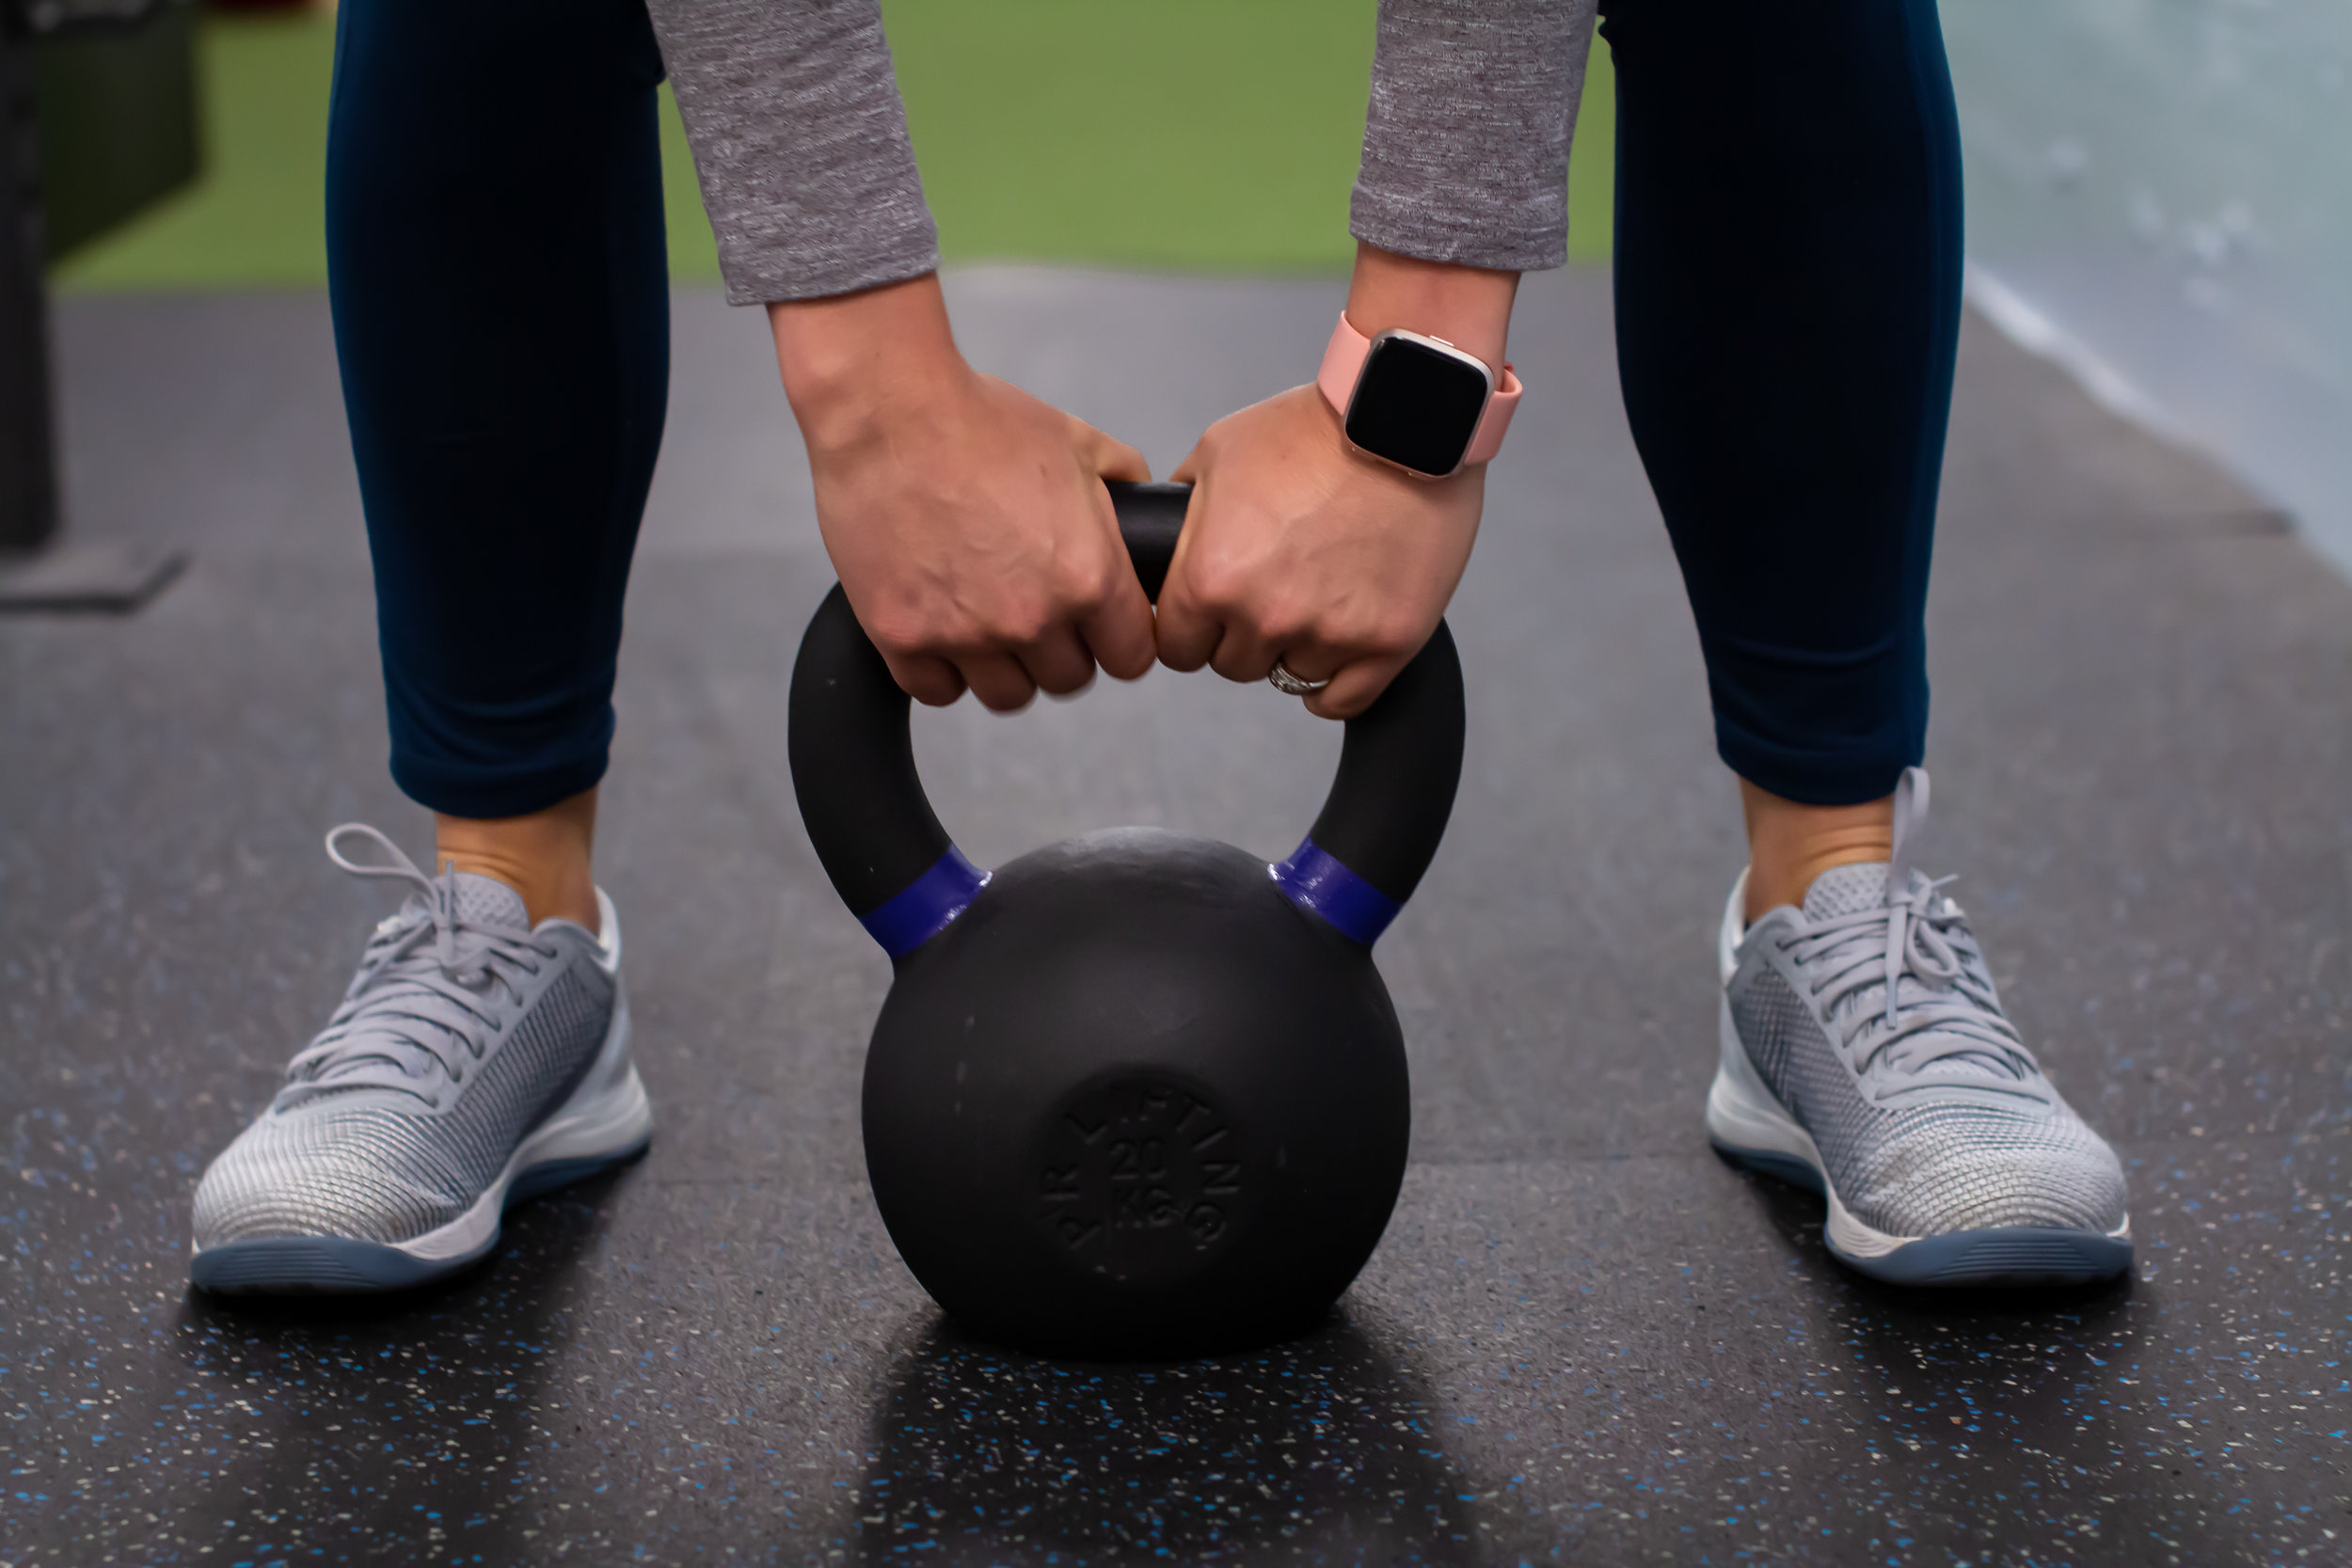 Patient lifting a kettle bell